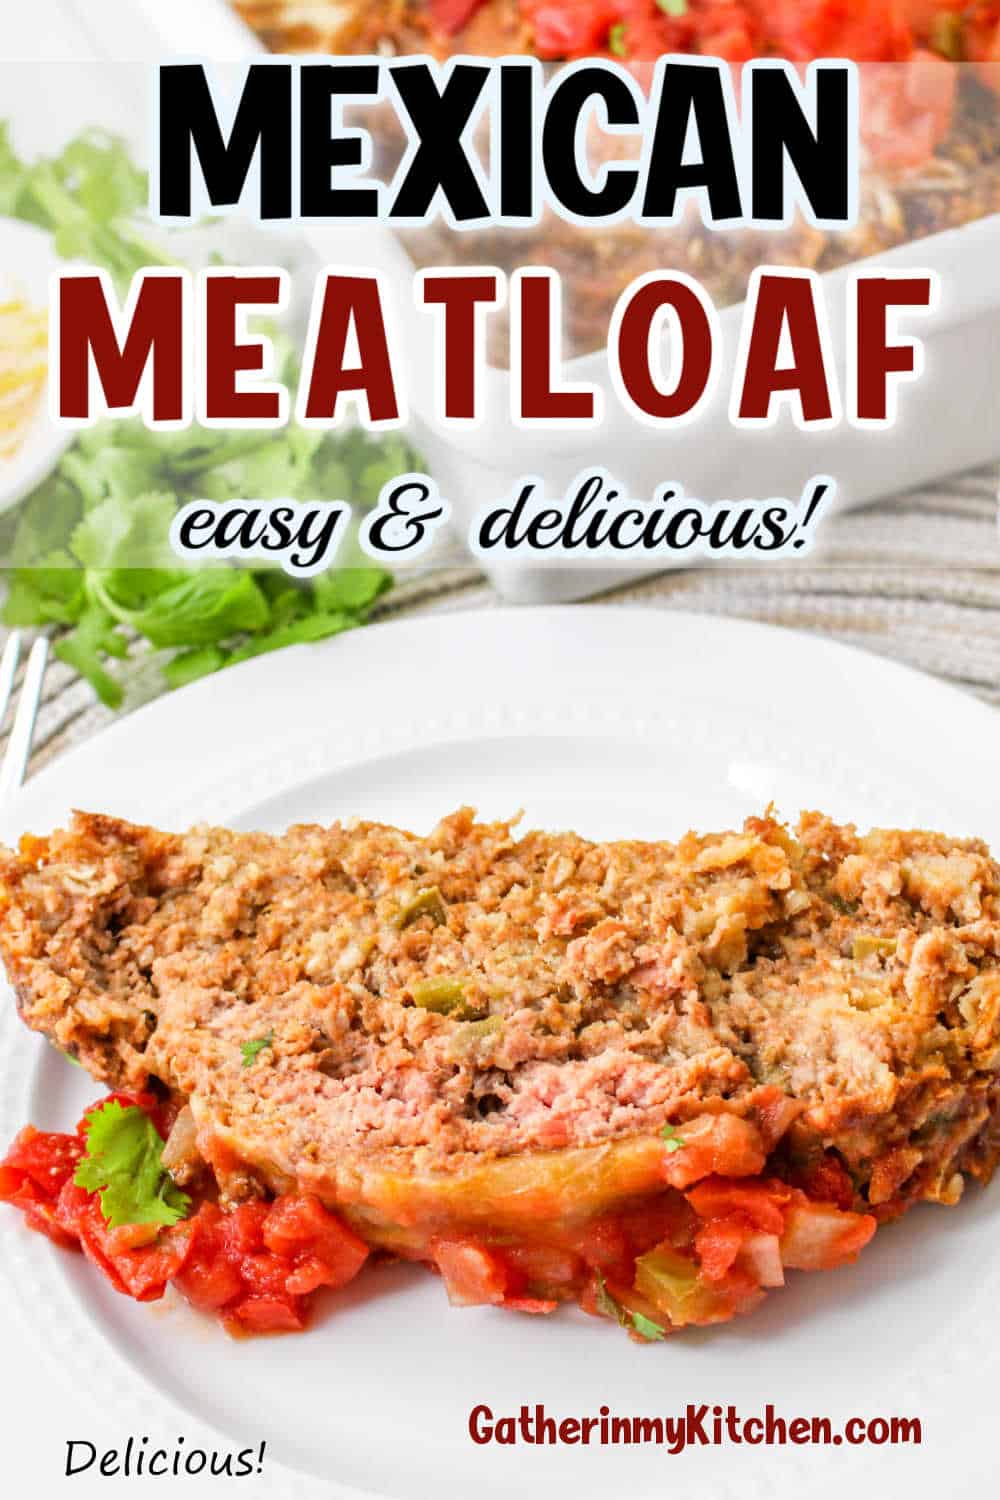 Pin image: top says "Mexican Meatloaf: easy & delicious" and bottom has a slice of Mexican meatloaf on a plate.